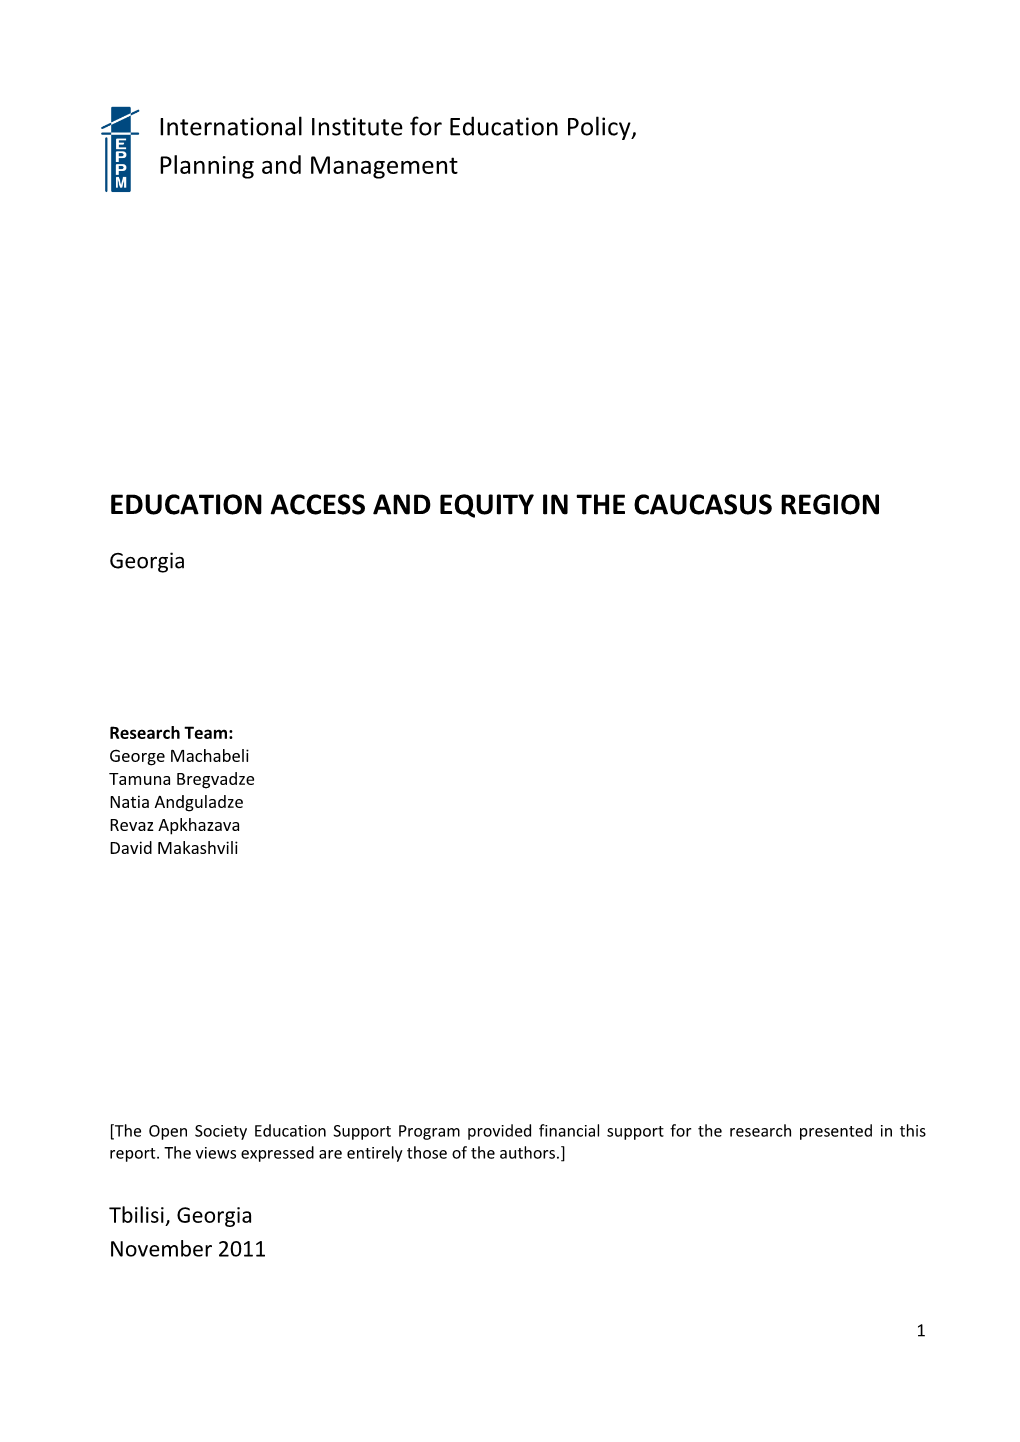 Education Access and Equity in the Caucasus Region